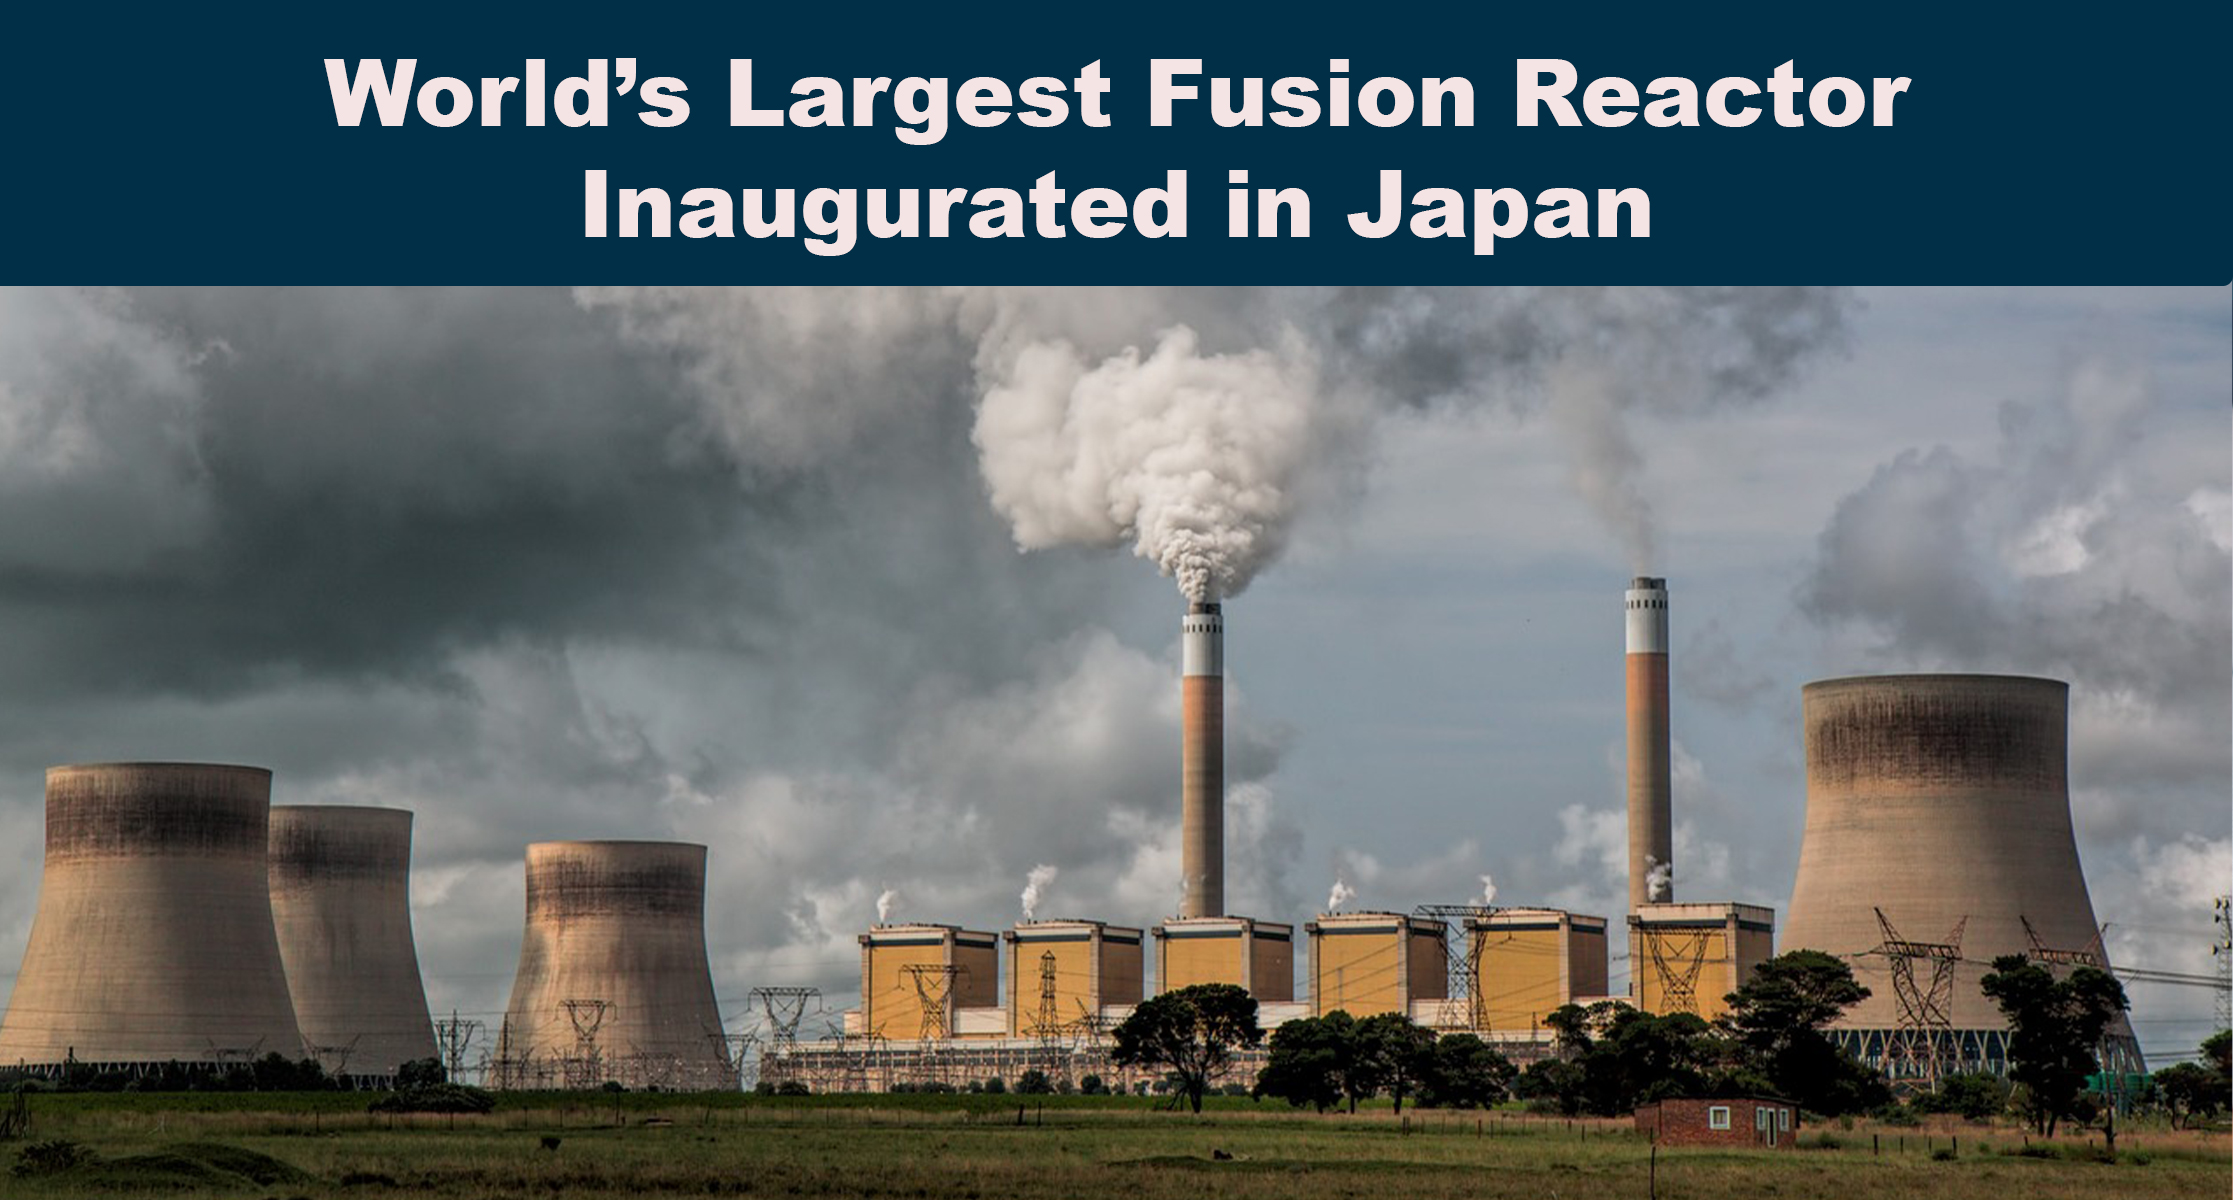 World’s Largest Fusion Reactor Inaugurated in Japan